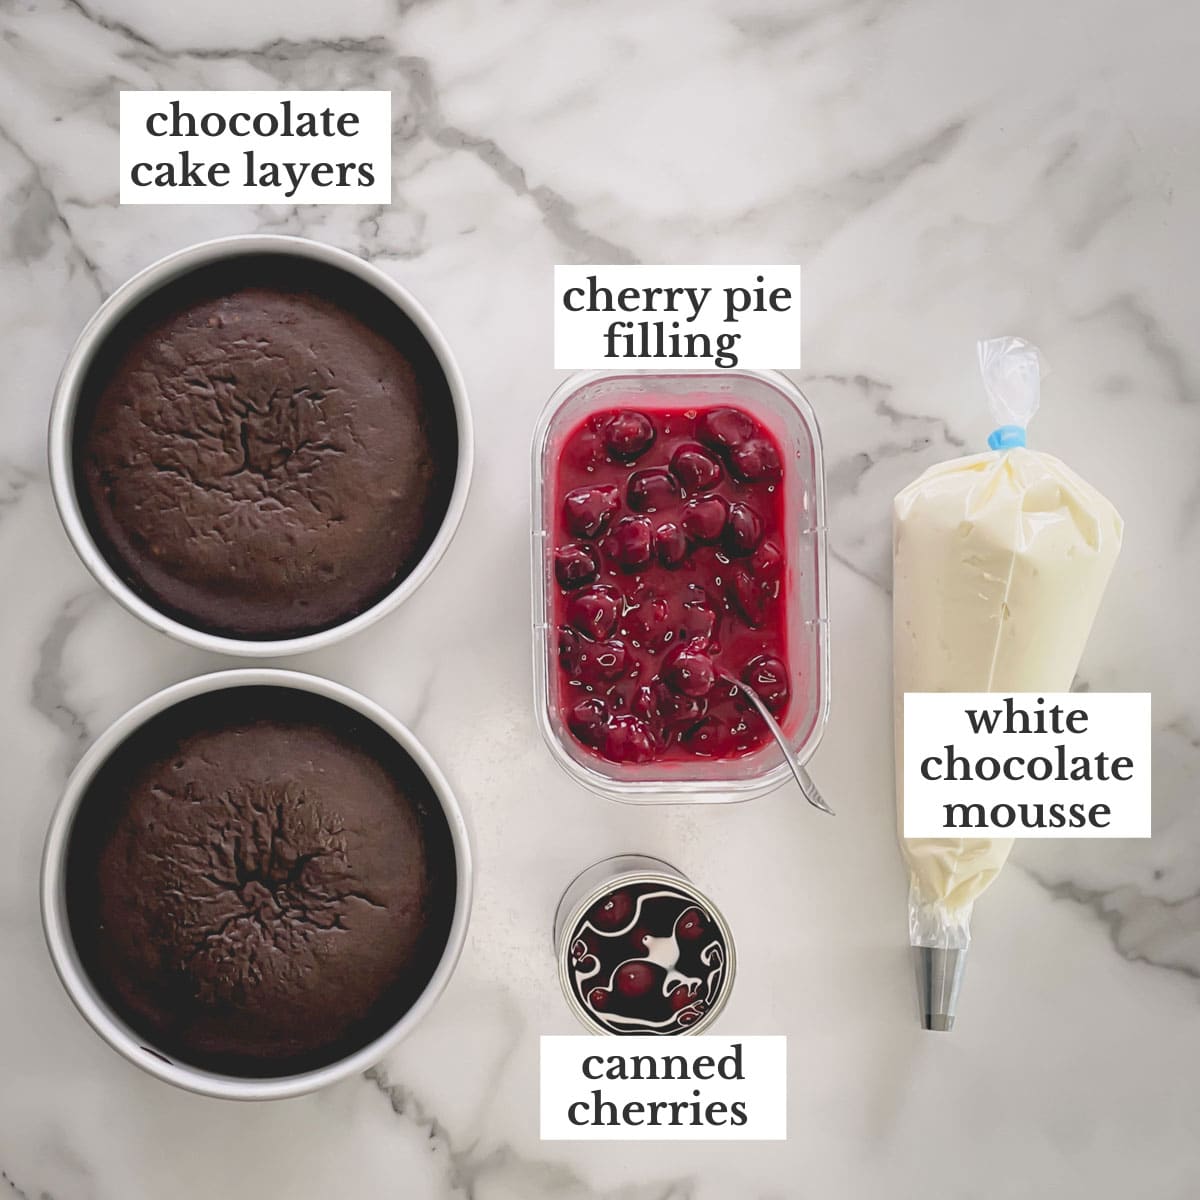 Black Forest Cake components.